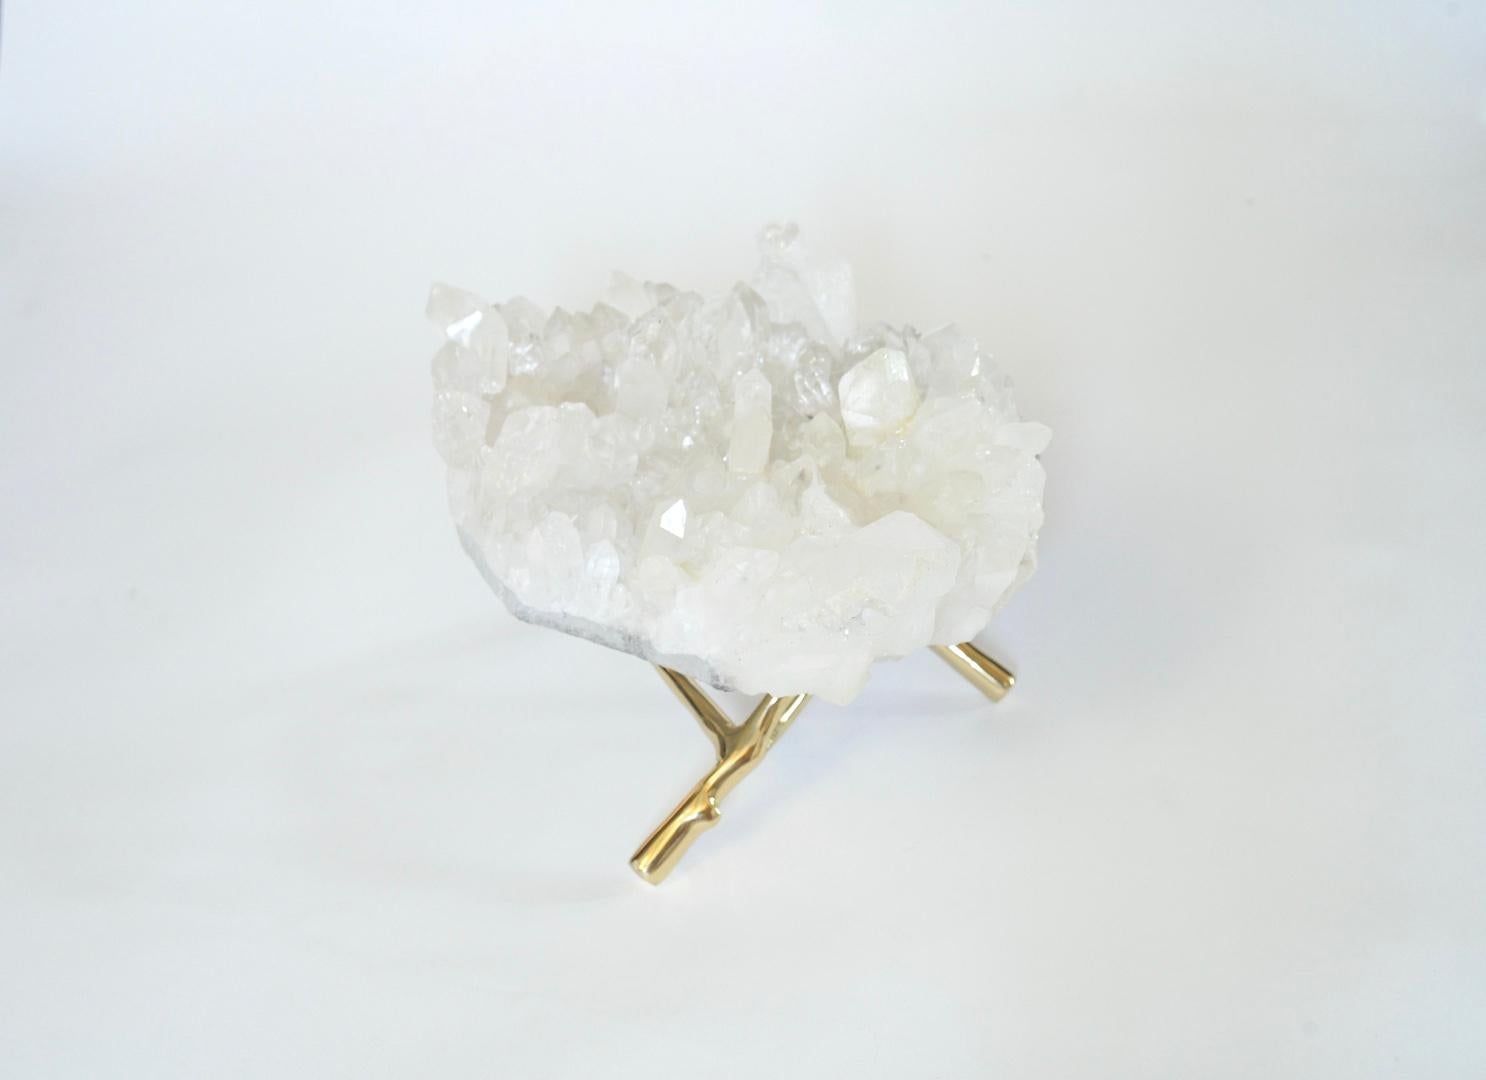 A natural rock crystal cluster with polish brass stand.
Measures: I 12” /L x 8” /D x 4” /H without stand.